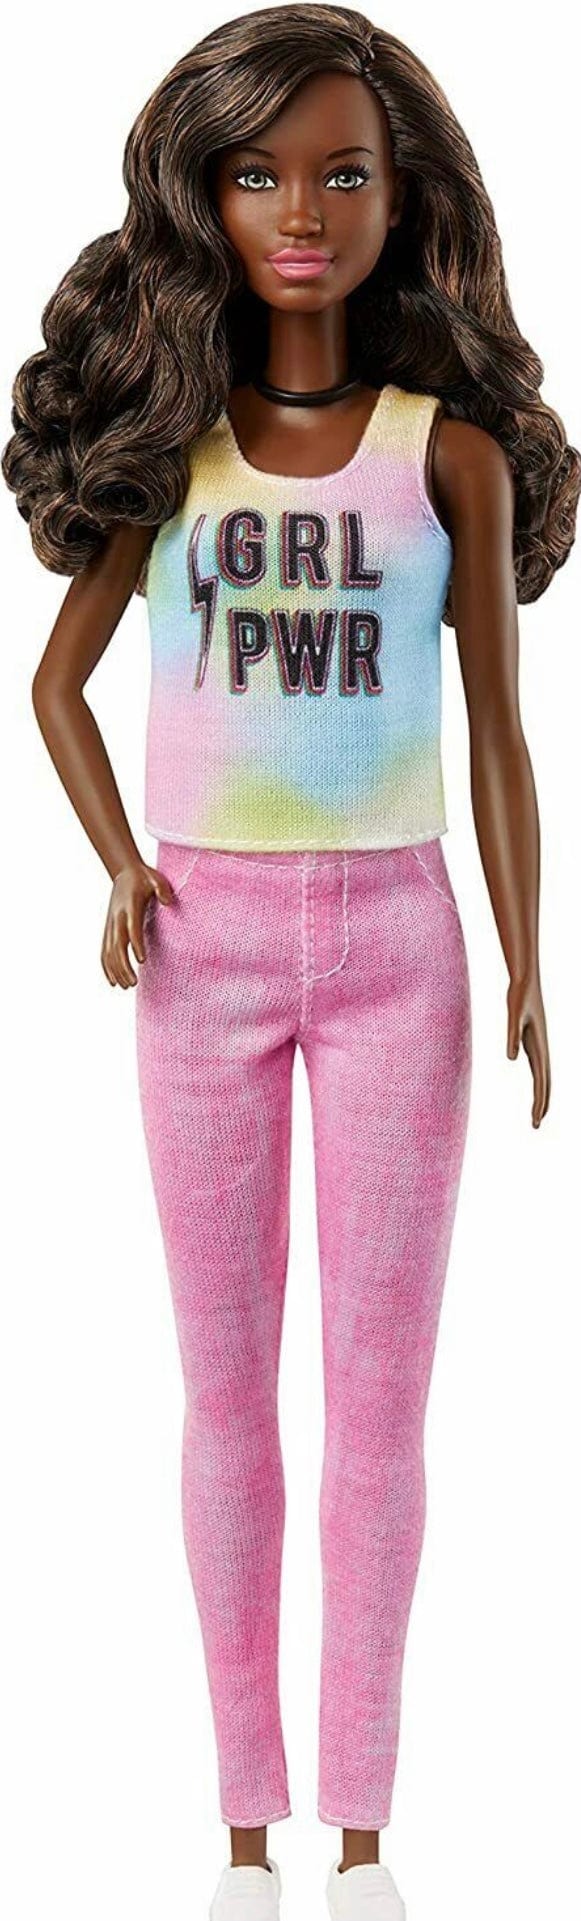 Barbie Surprise Career Doll with Accessories